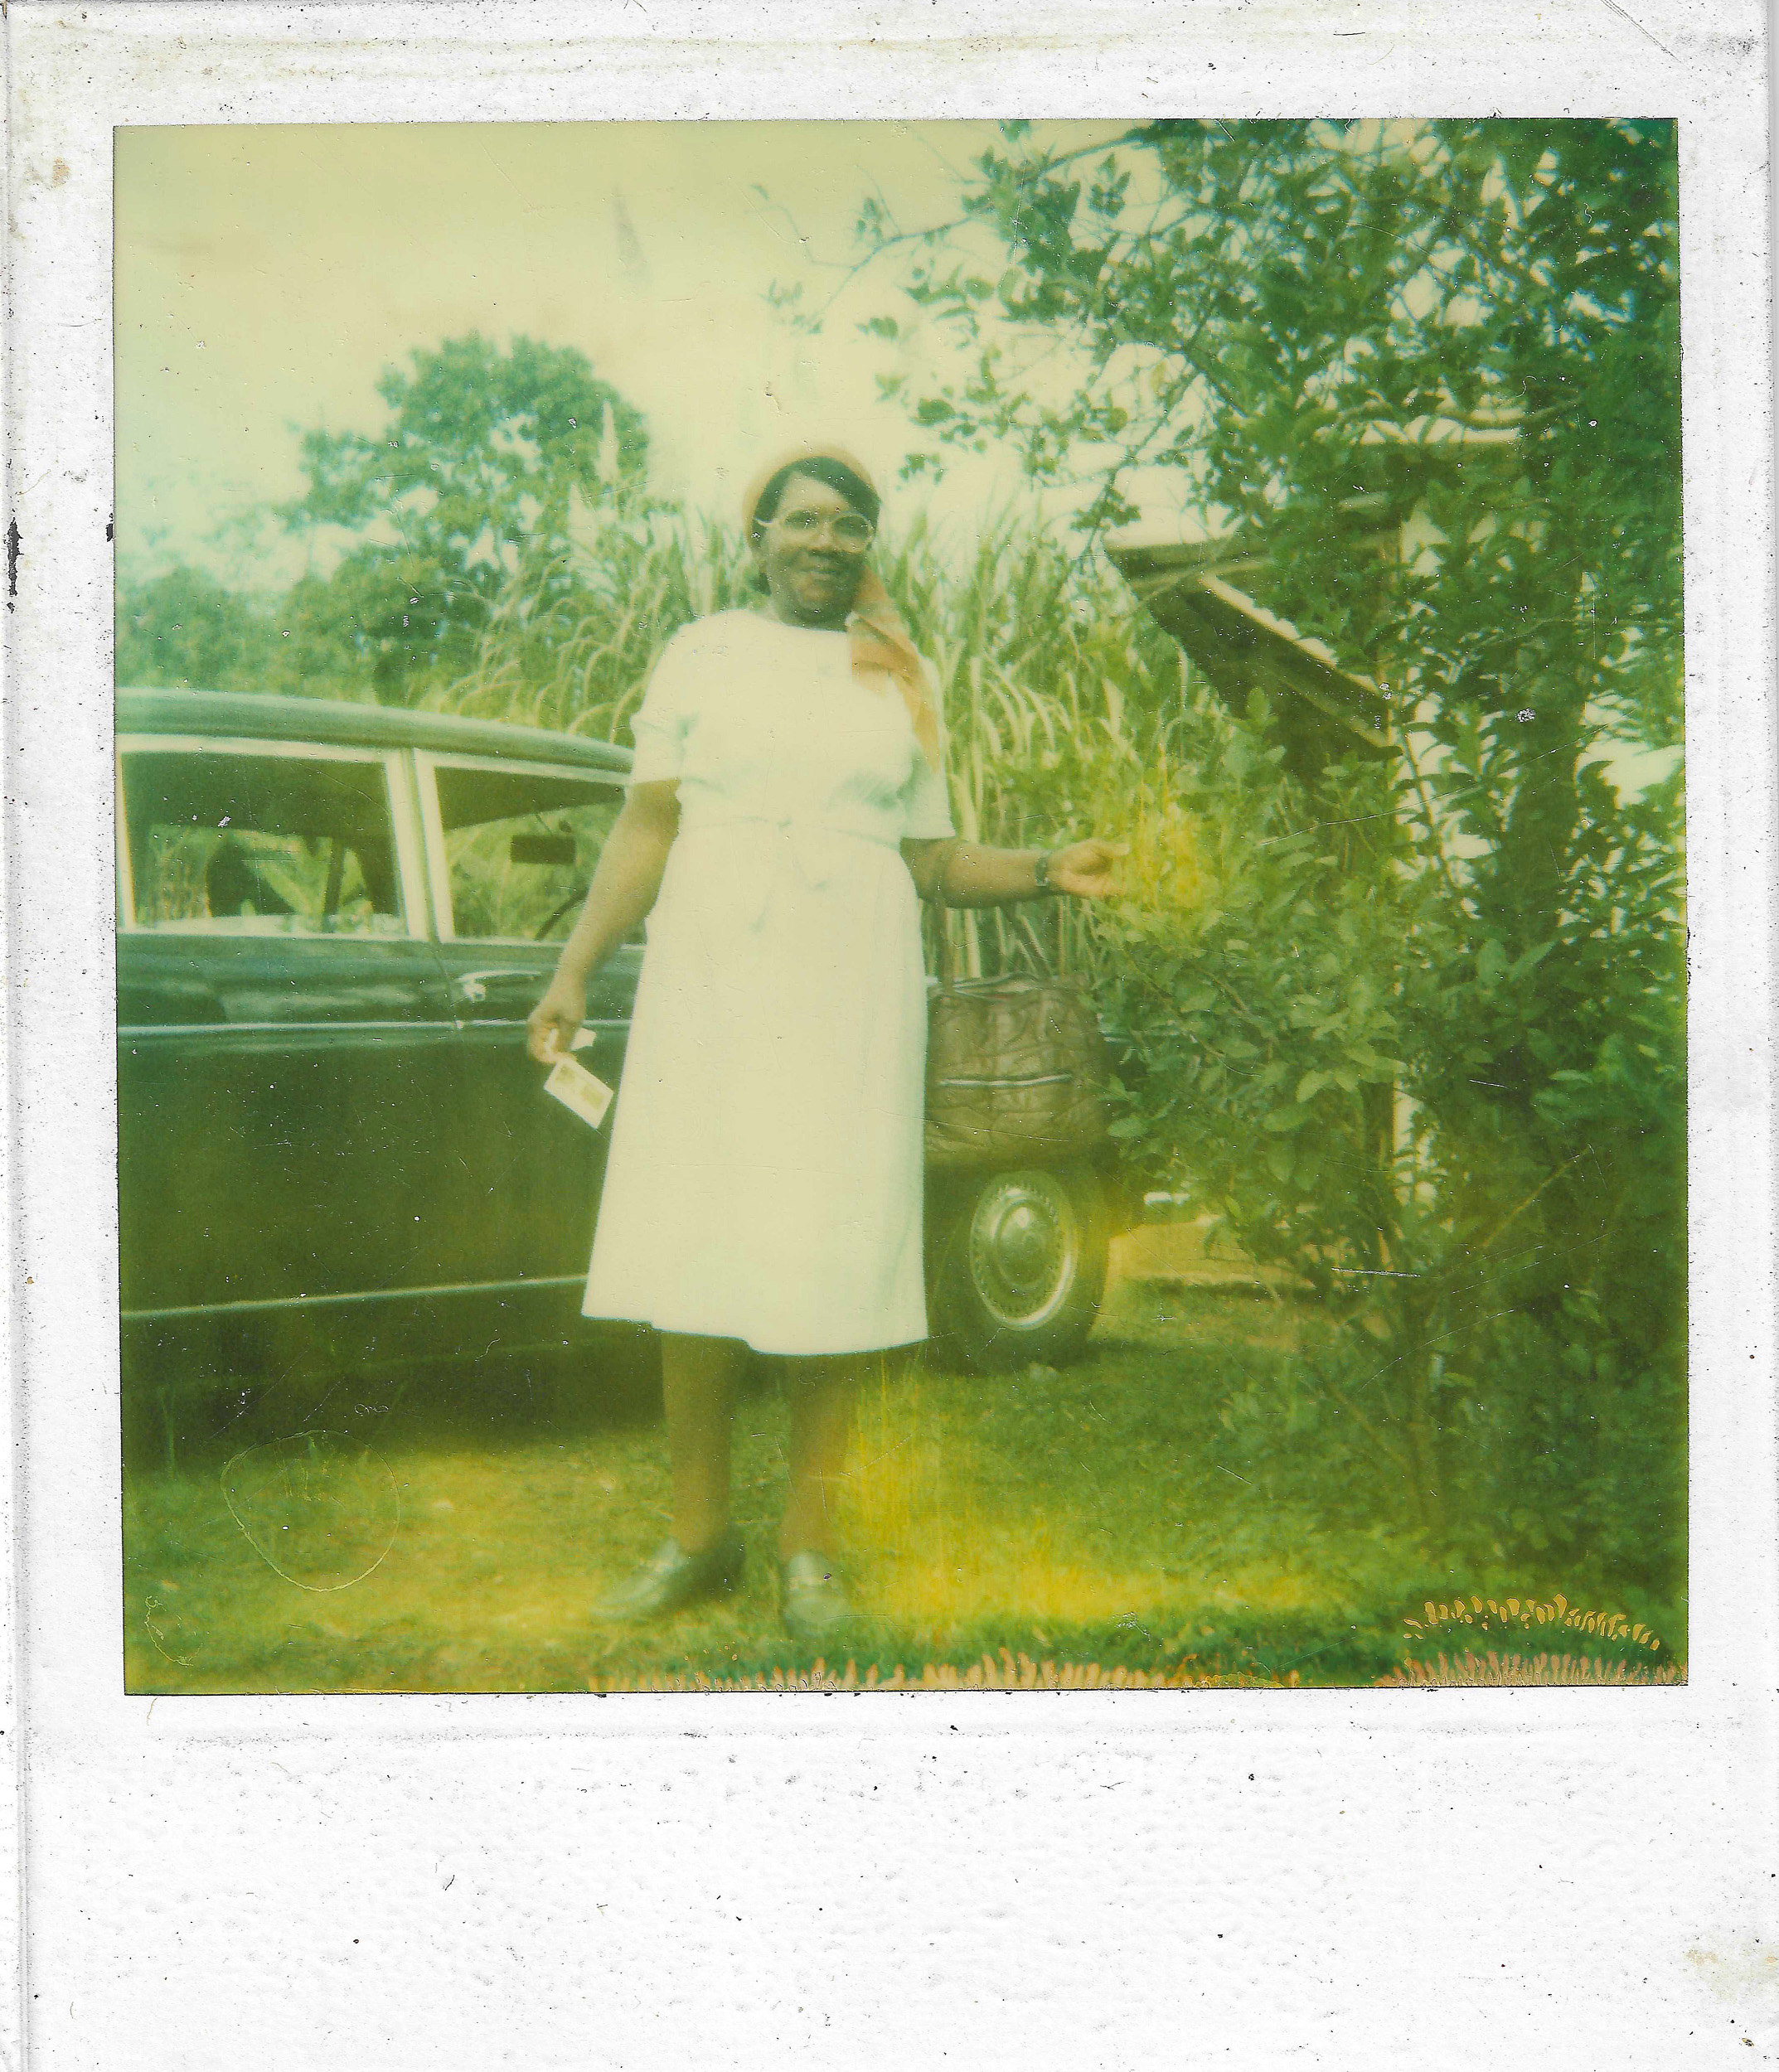 Woman standing in front of a car.